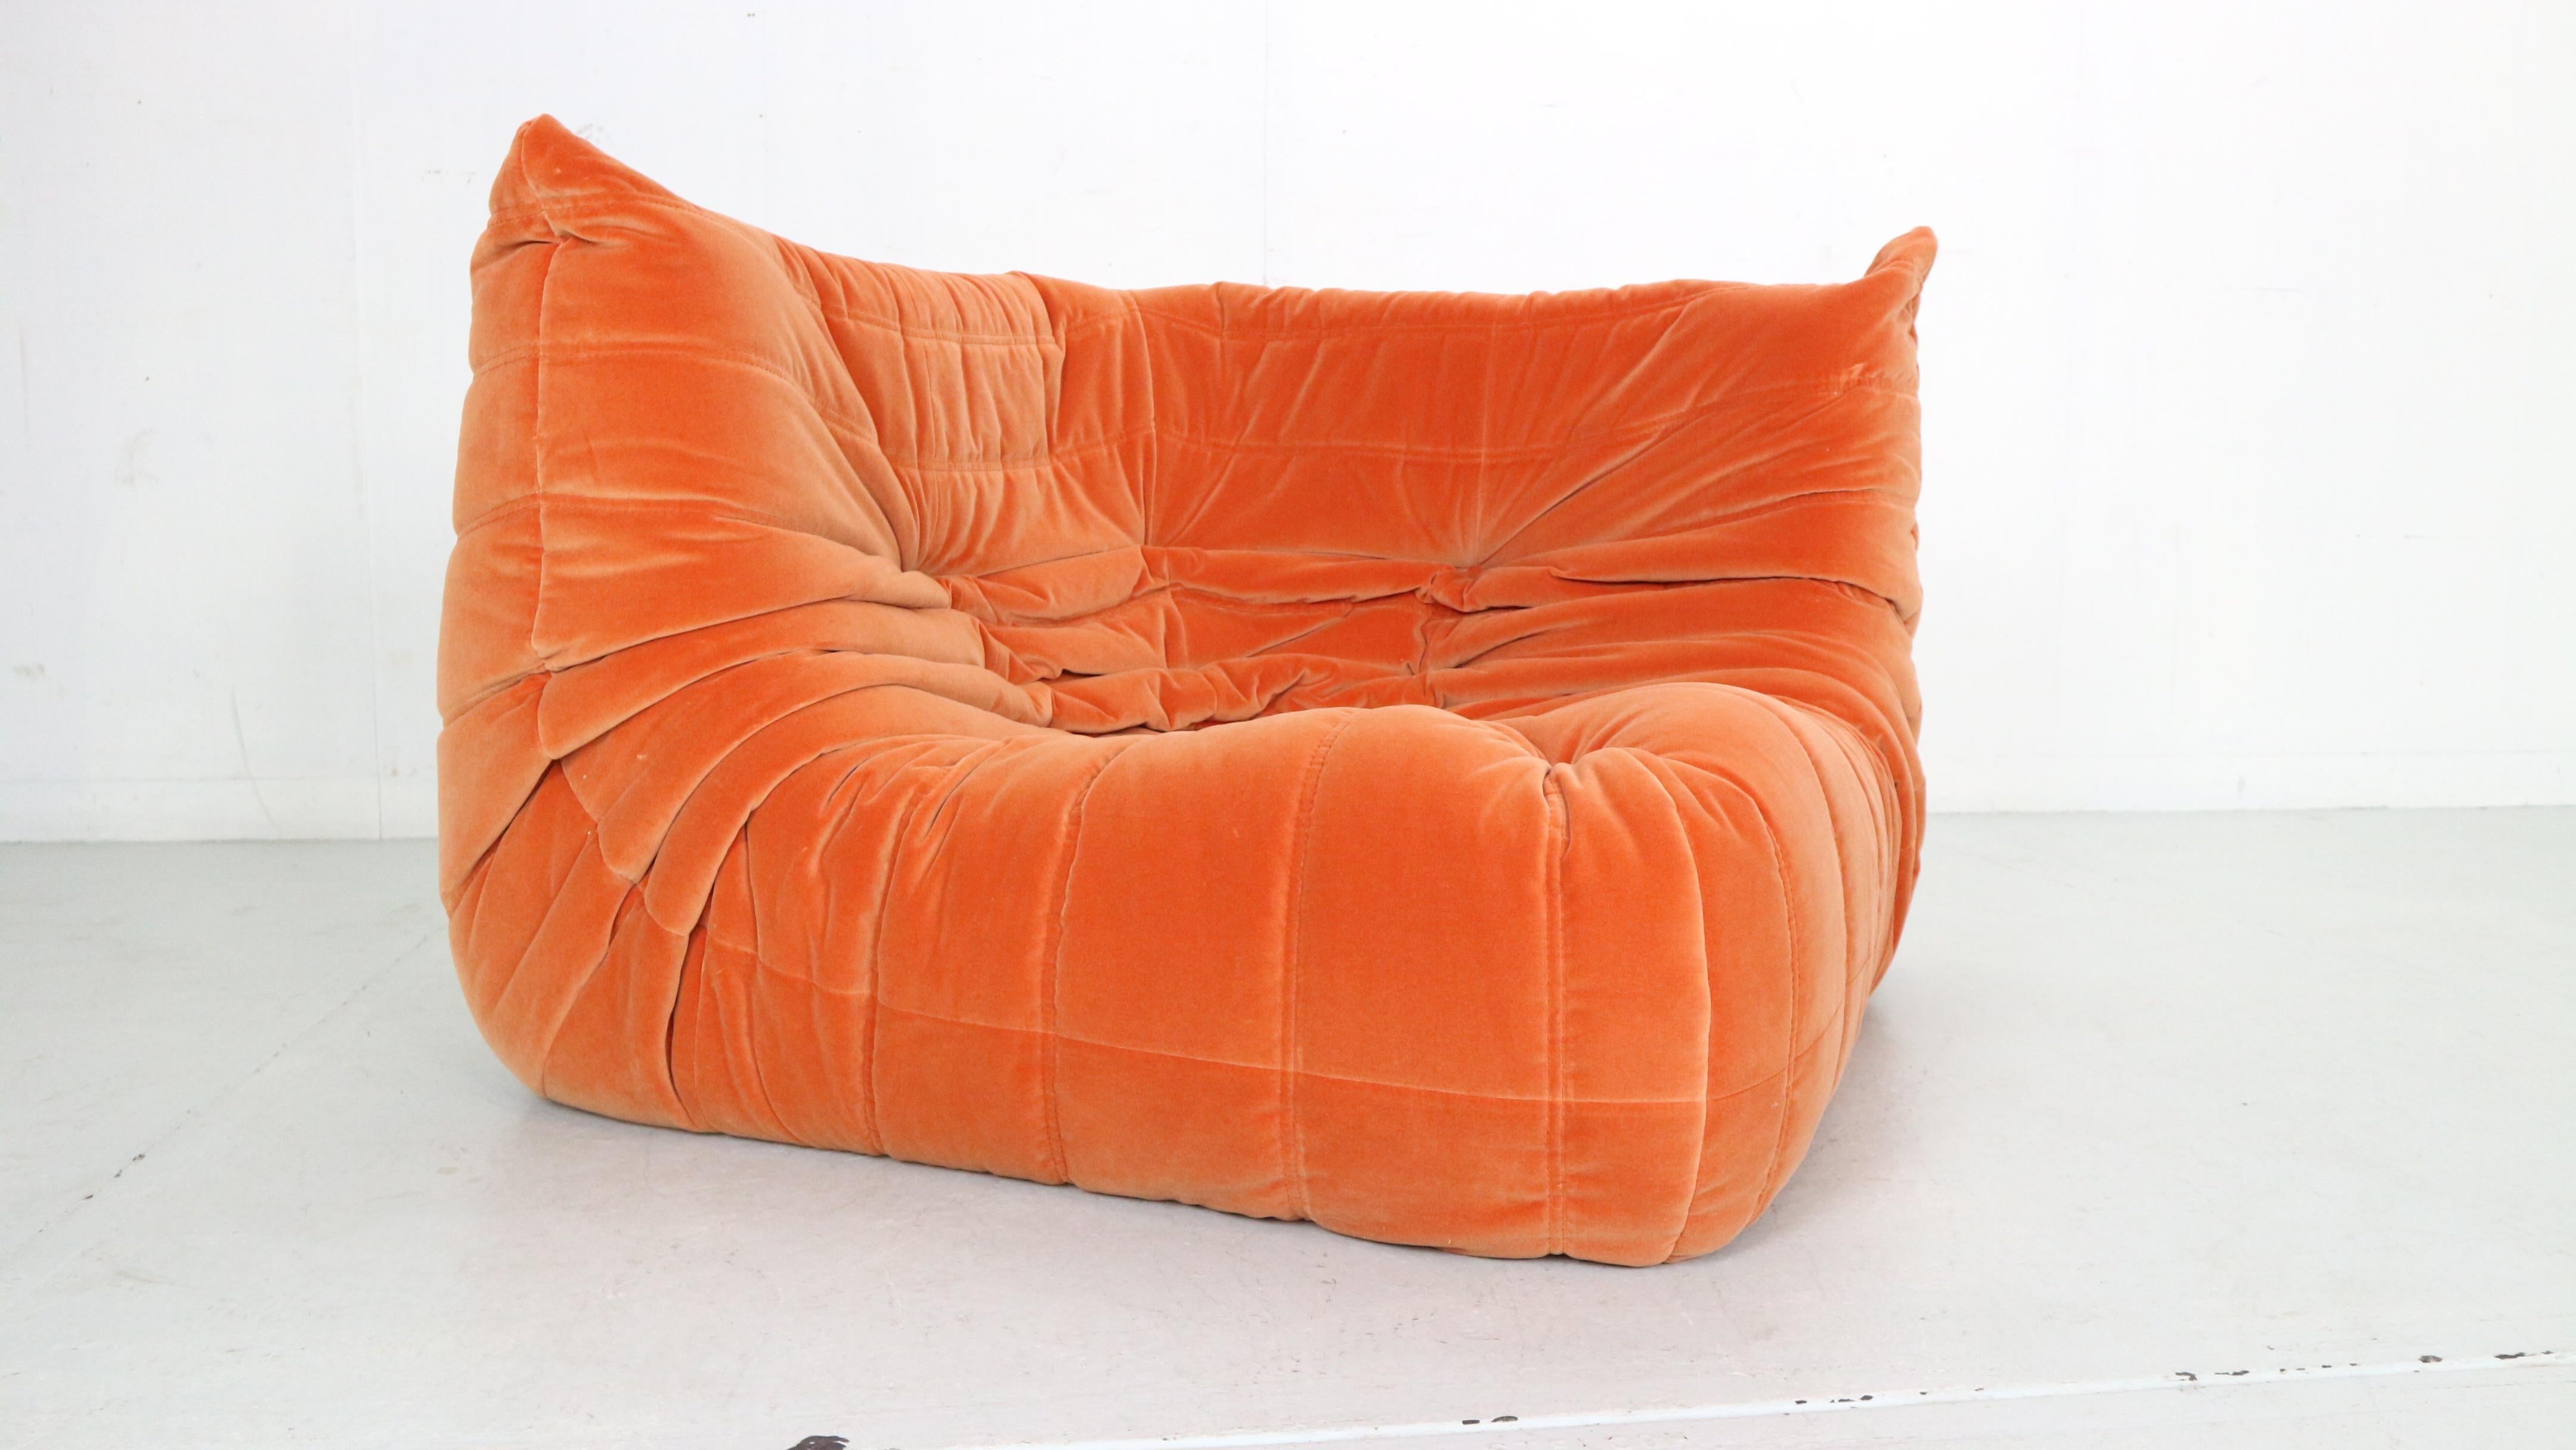 Magnificent Togo corner lounge chair designed by Michel Ducaroy in 1973 and was manufactured by Ligne Roset in France.
Very comfortable and beautiful accent to your living room space.
It has been newly reupholstered in an orange soft velvet